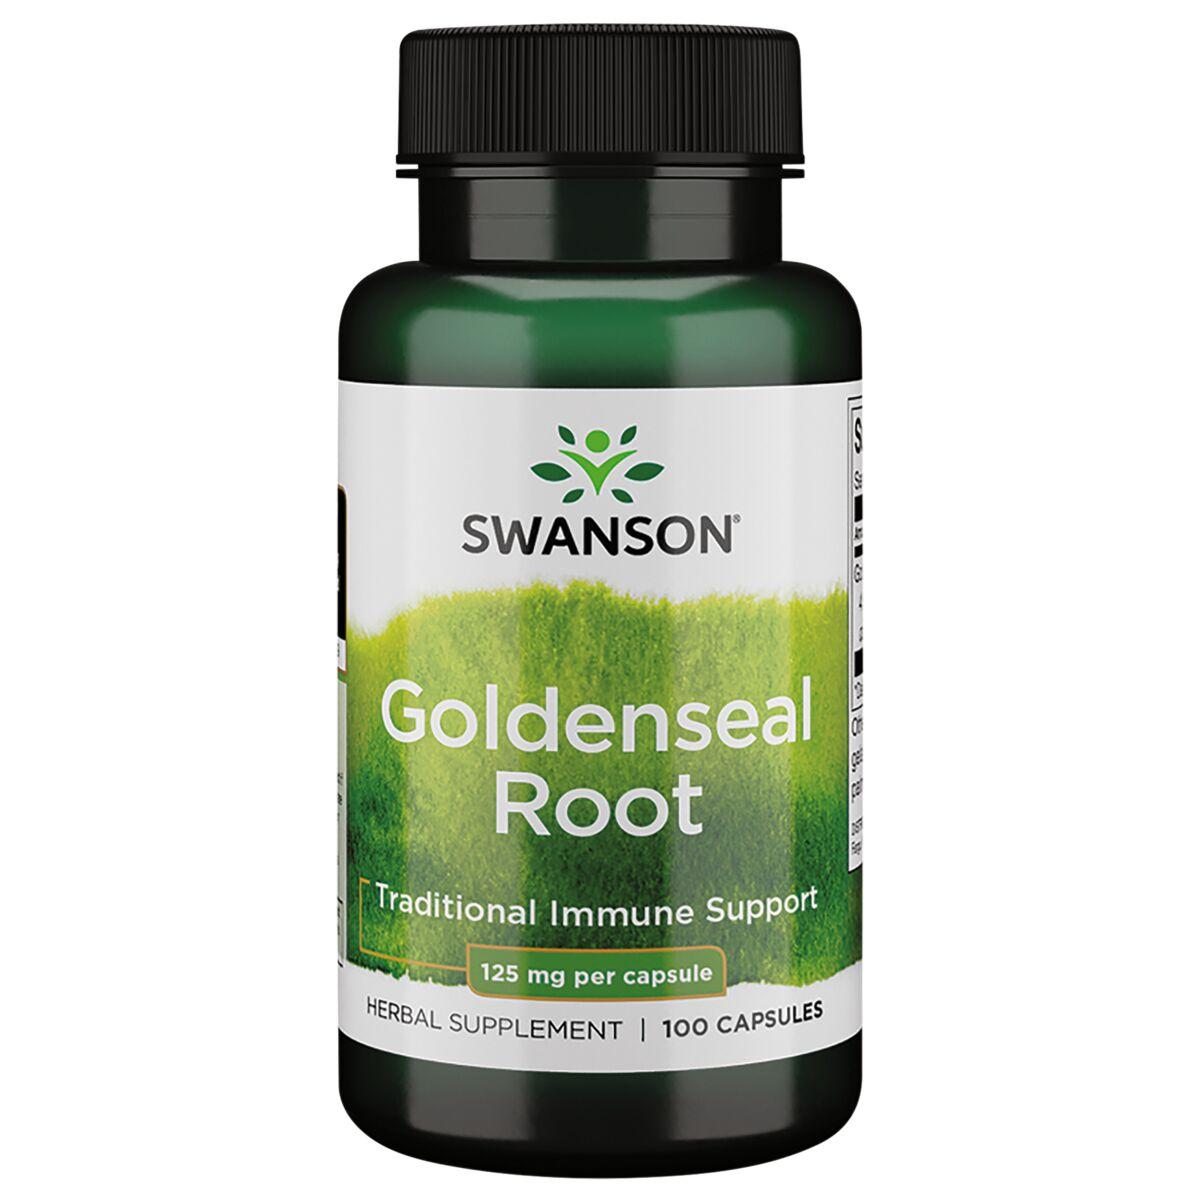 Swanson Premium Goldenseal Root Vitamin 125 mg 100 Caps Herbs and Supplements